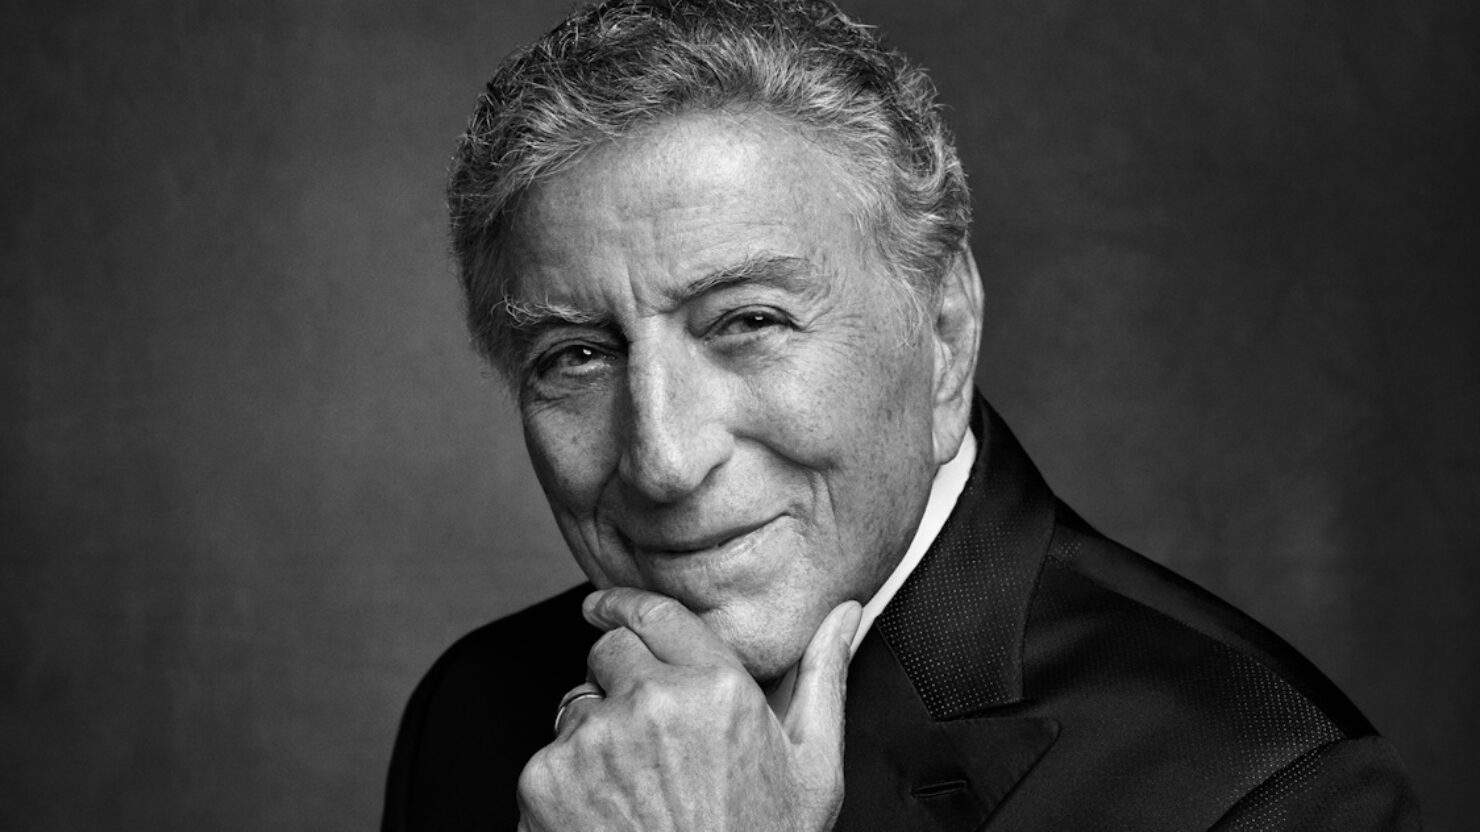 Iconic Musician and Singer Tony Bennett Dies at 96 A Look Back to the His Remarkable Life and Career. (Credits: JamBase)